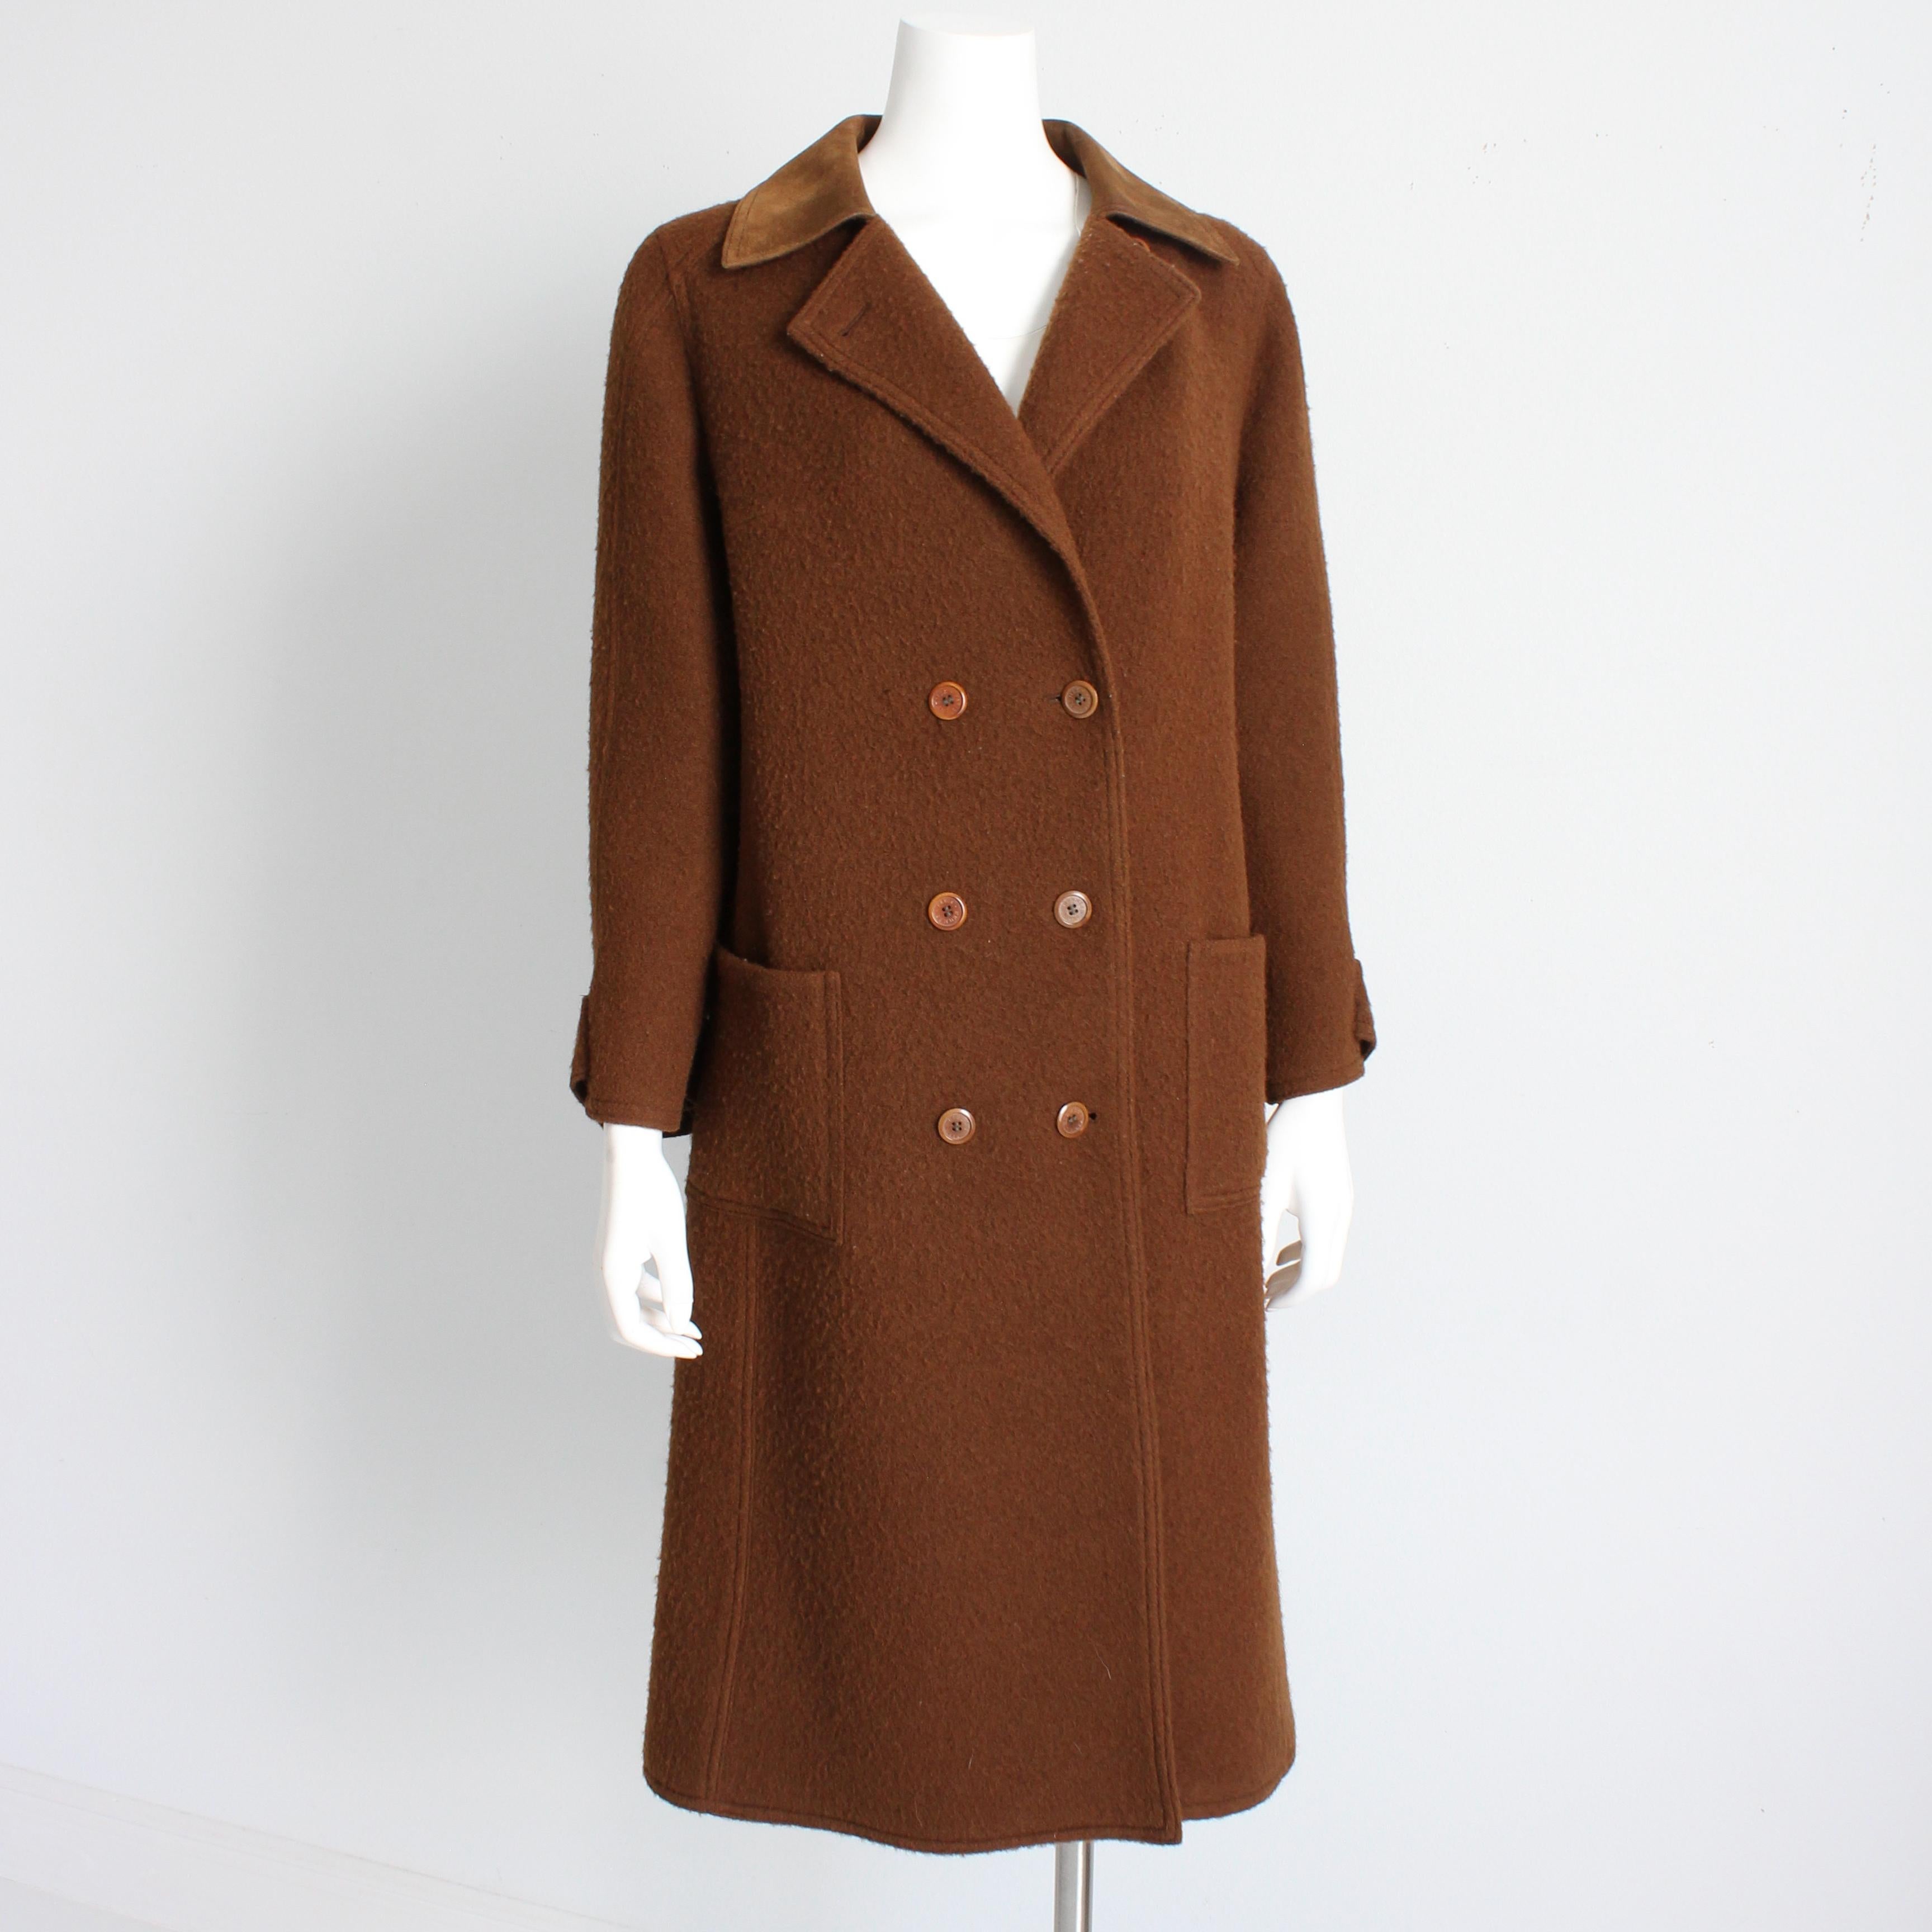 Hermes Brown Double Breasted Suede Leather Trim Trench Style Wool Coat, 1970s For Sale 6